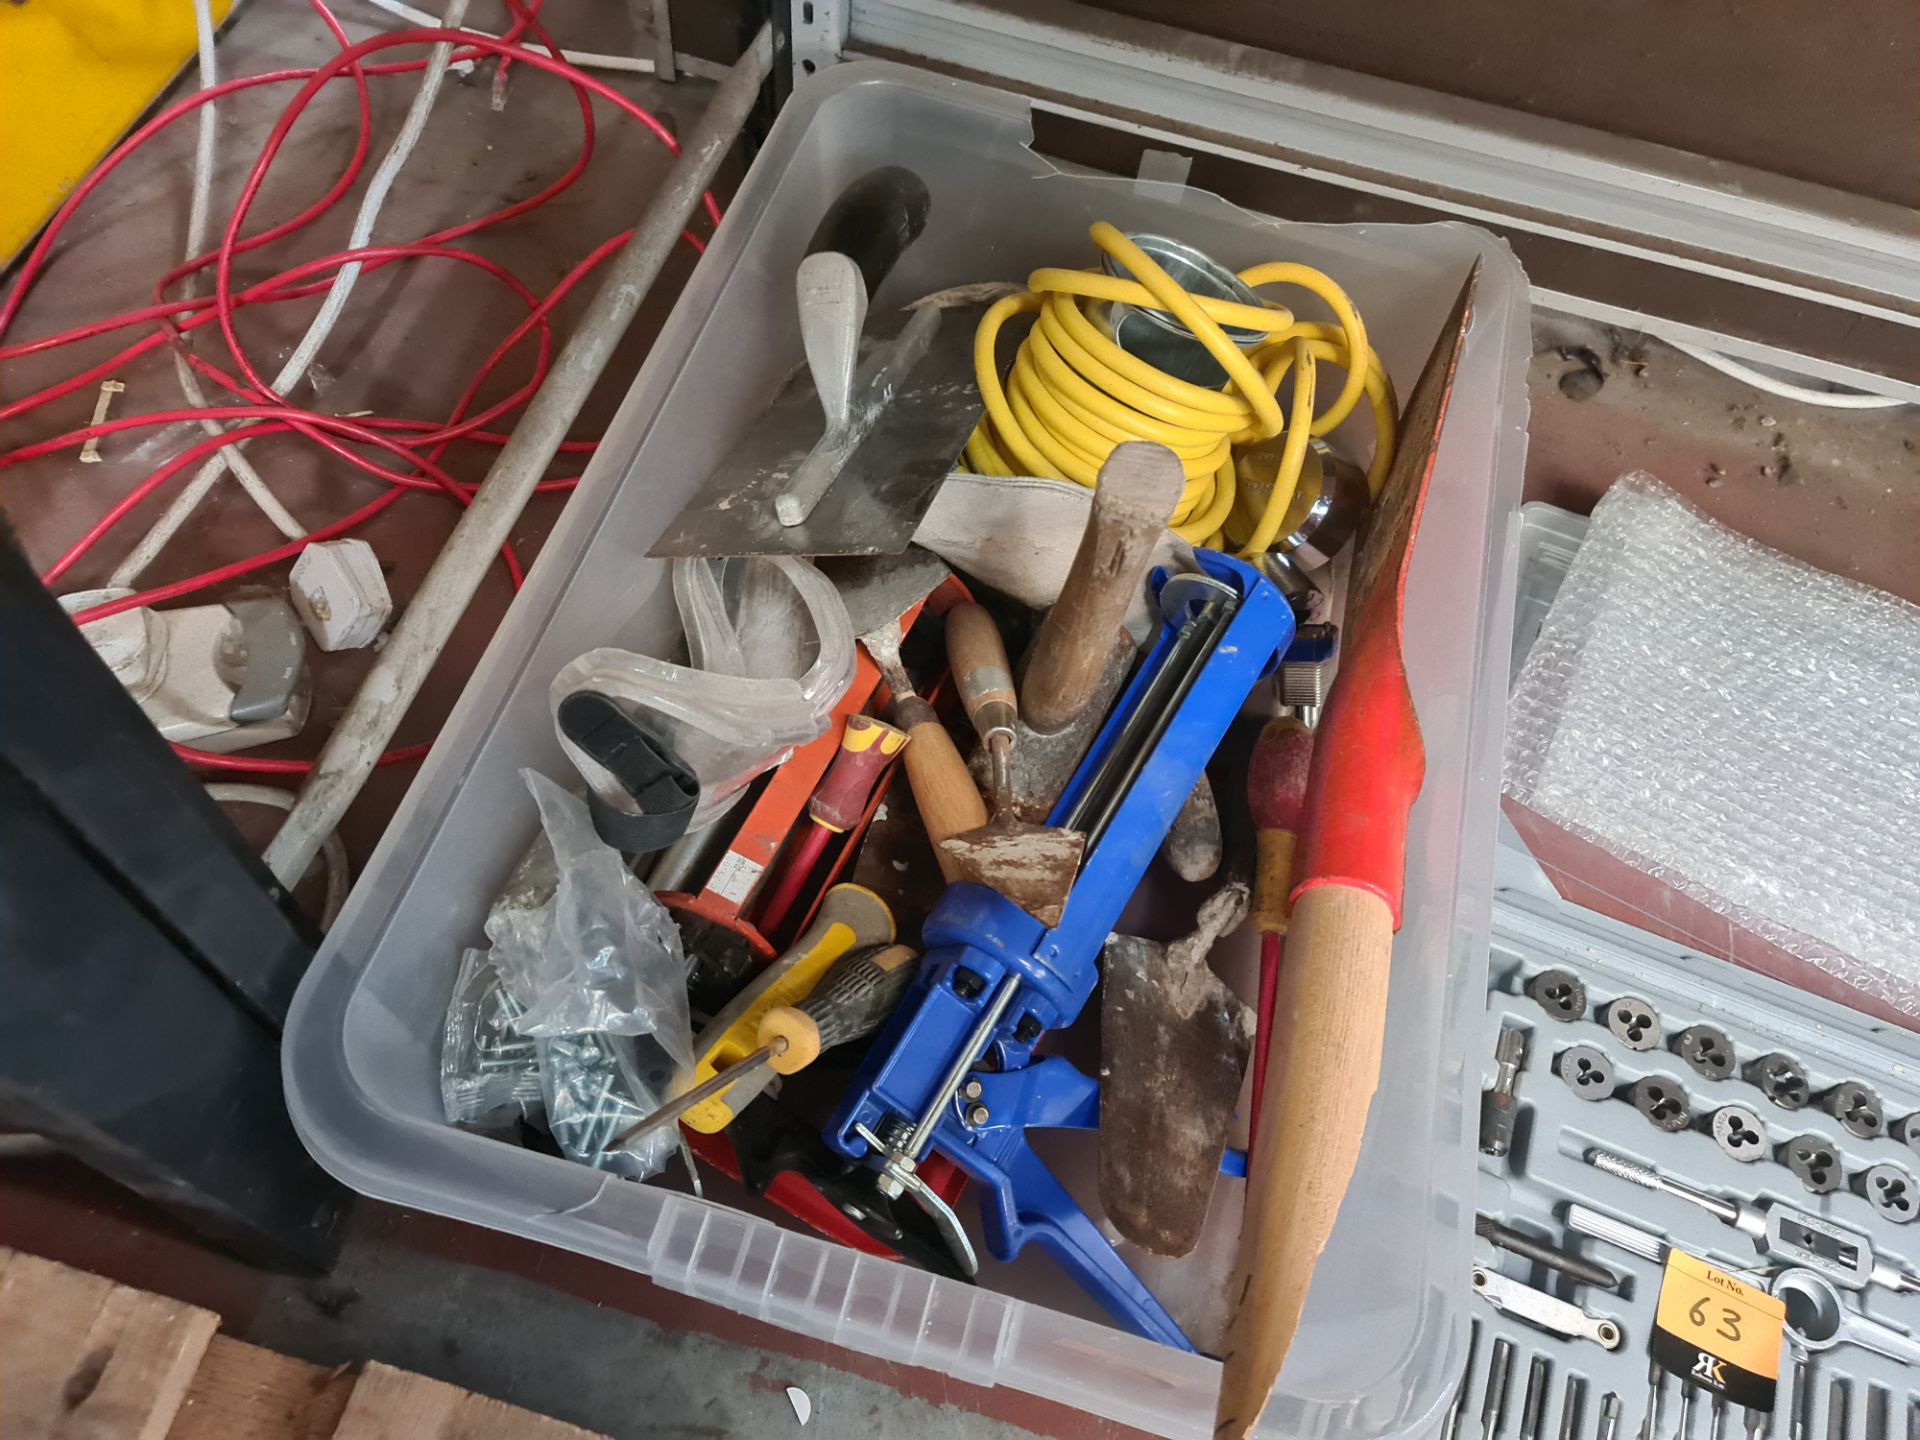 Contents of a crate of assorted hand tools - crate excluded